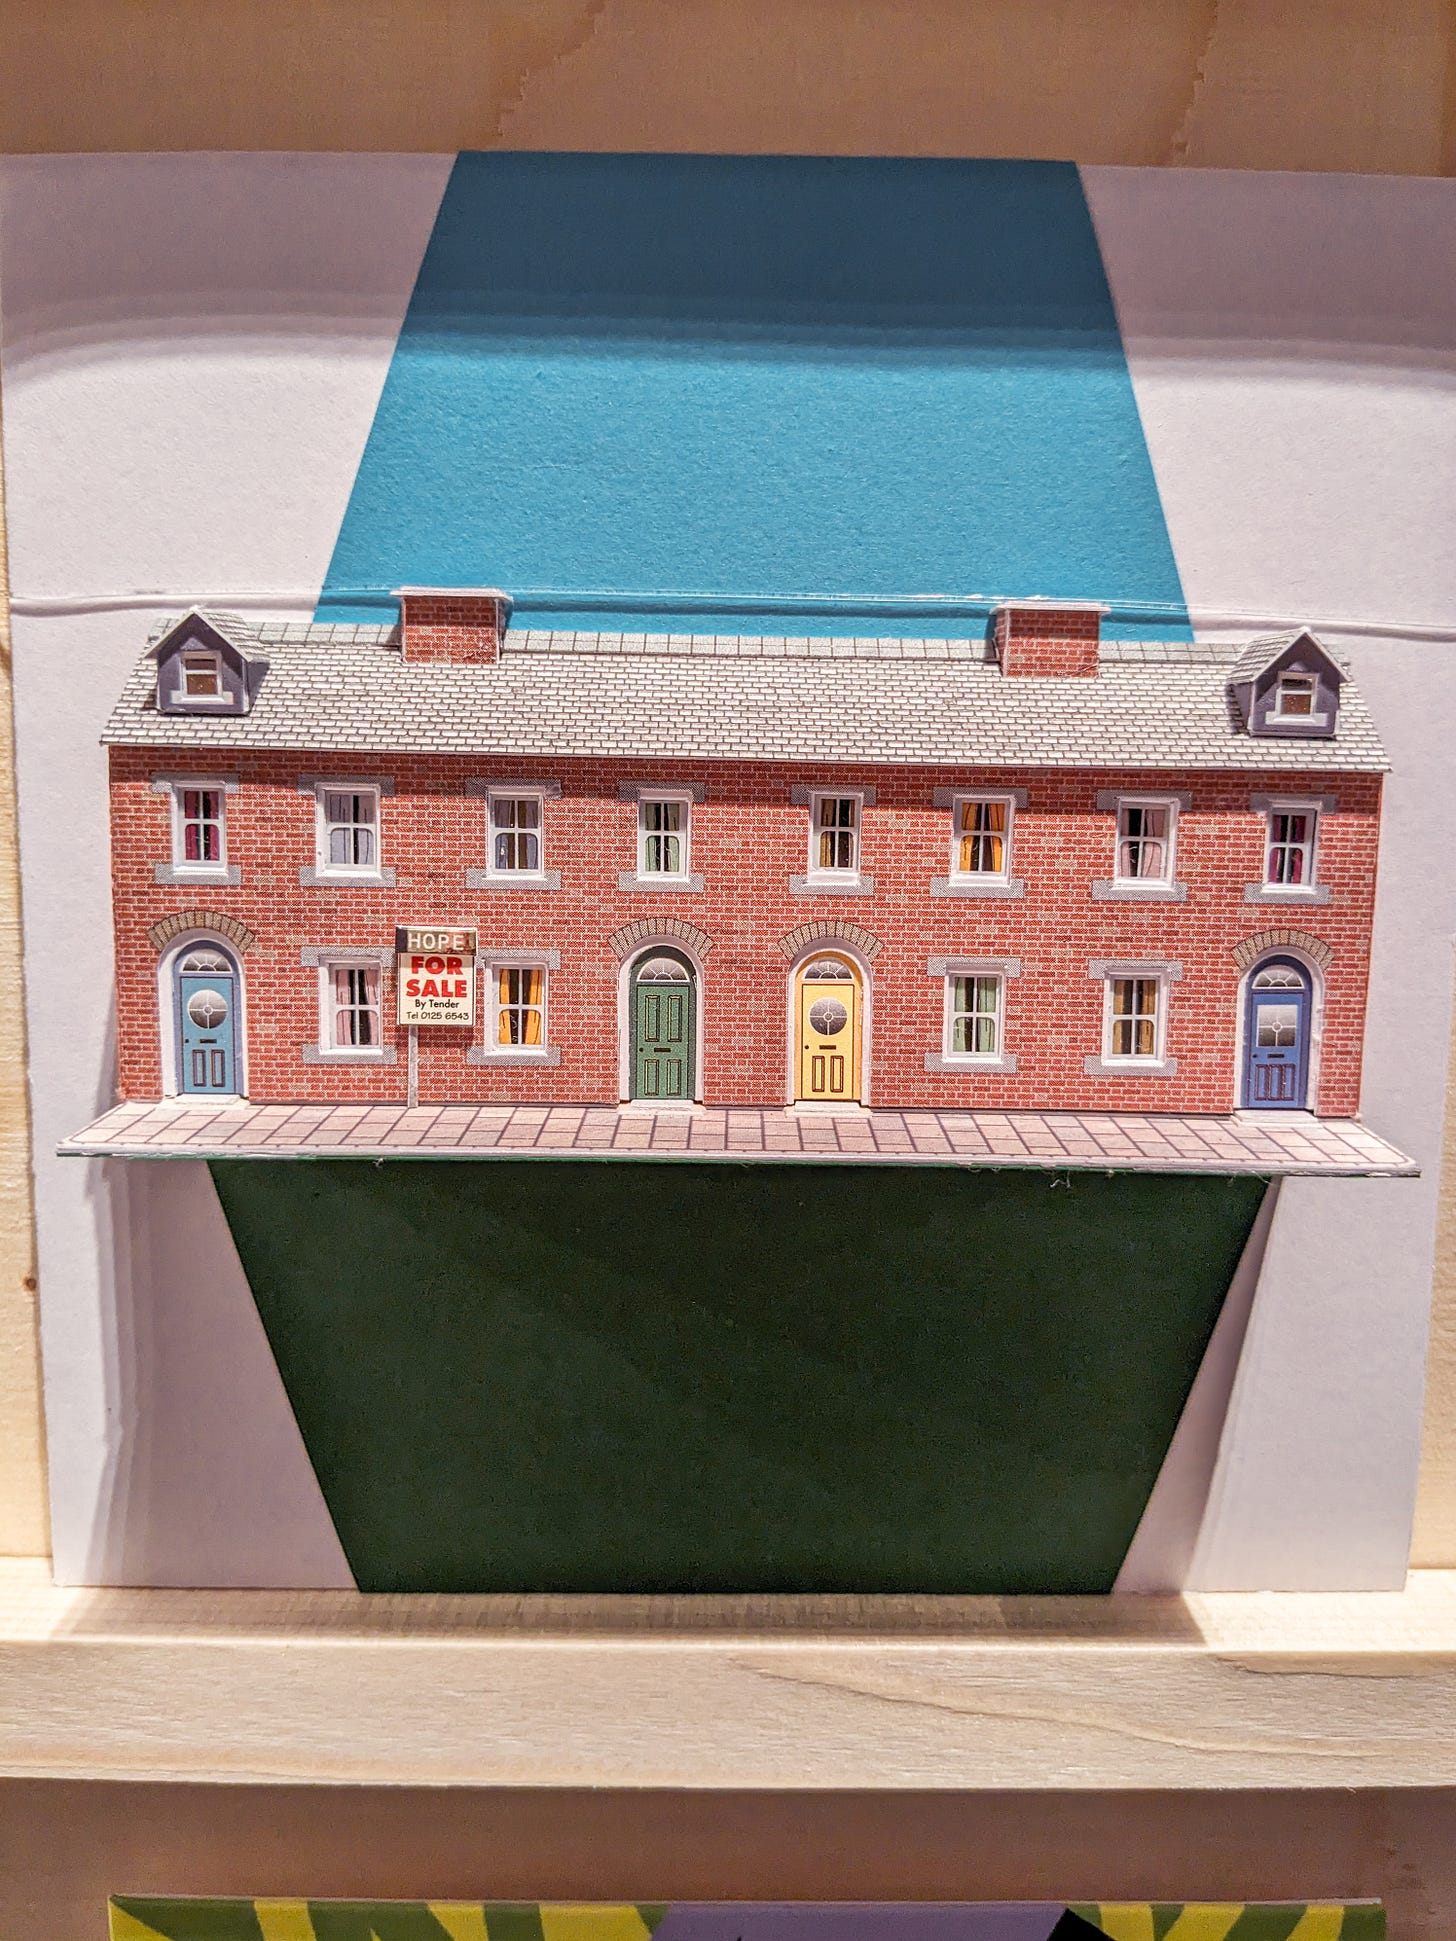 A 3D row of terraced houses made from card. There is a sign next to one of the windows that says "Hope for sale"